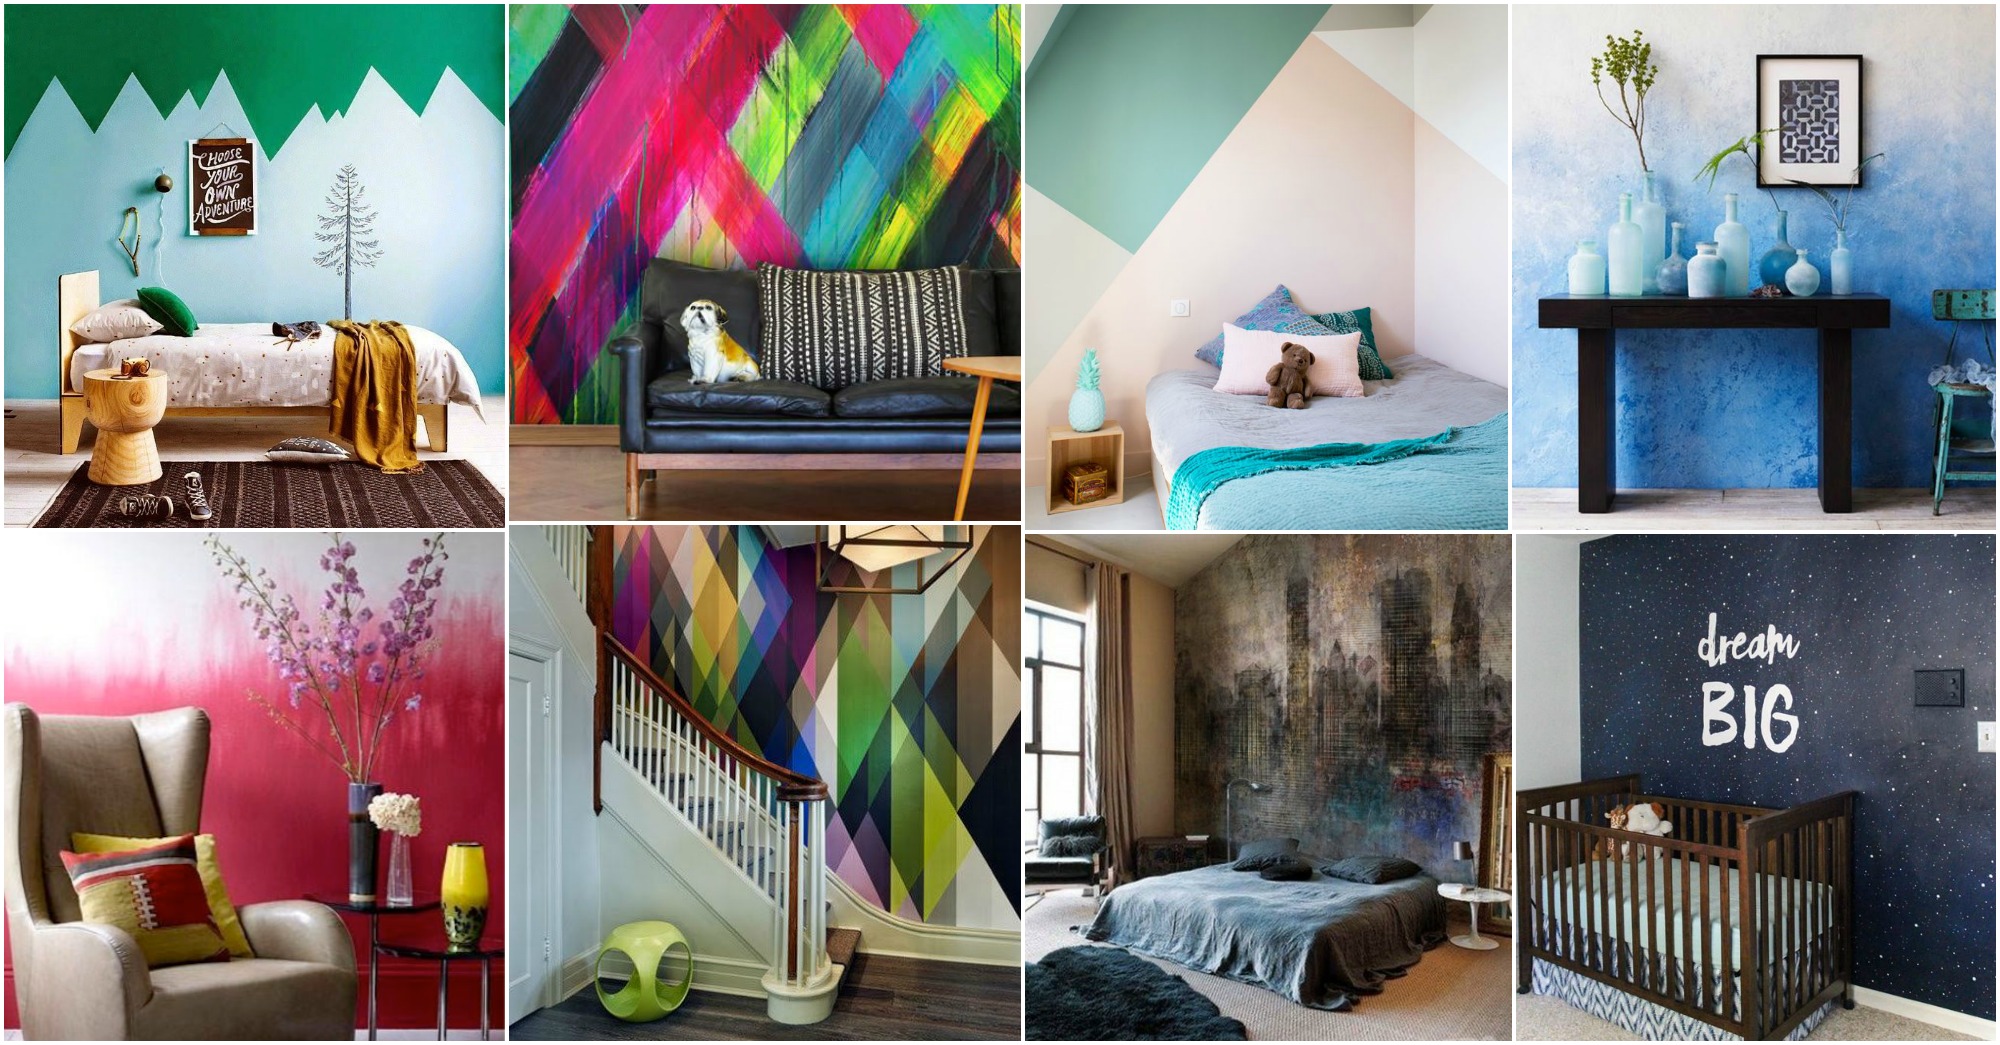 Wonderful Painted Wall Decor Ideas That Will Mesmerize You